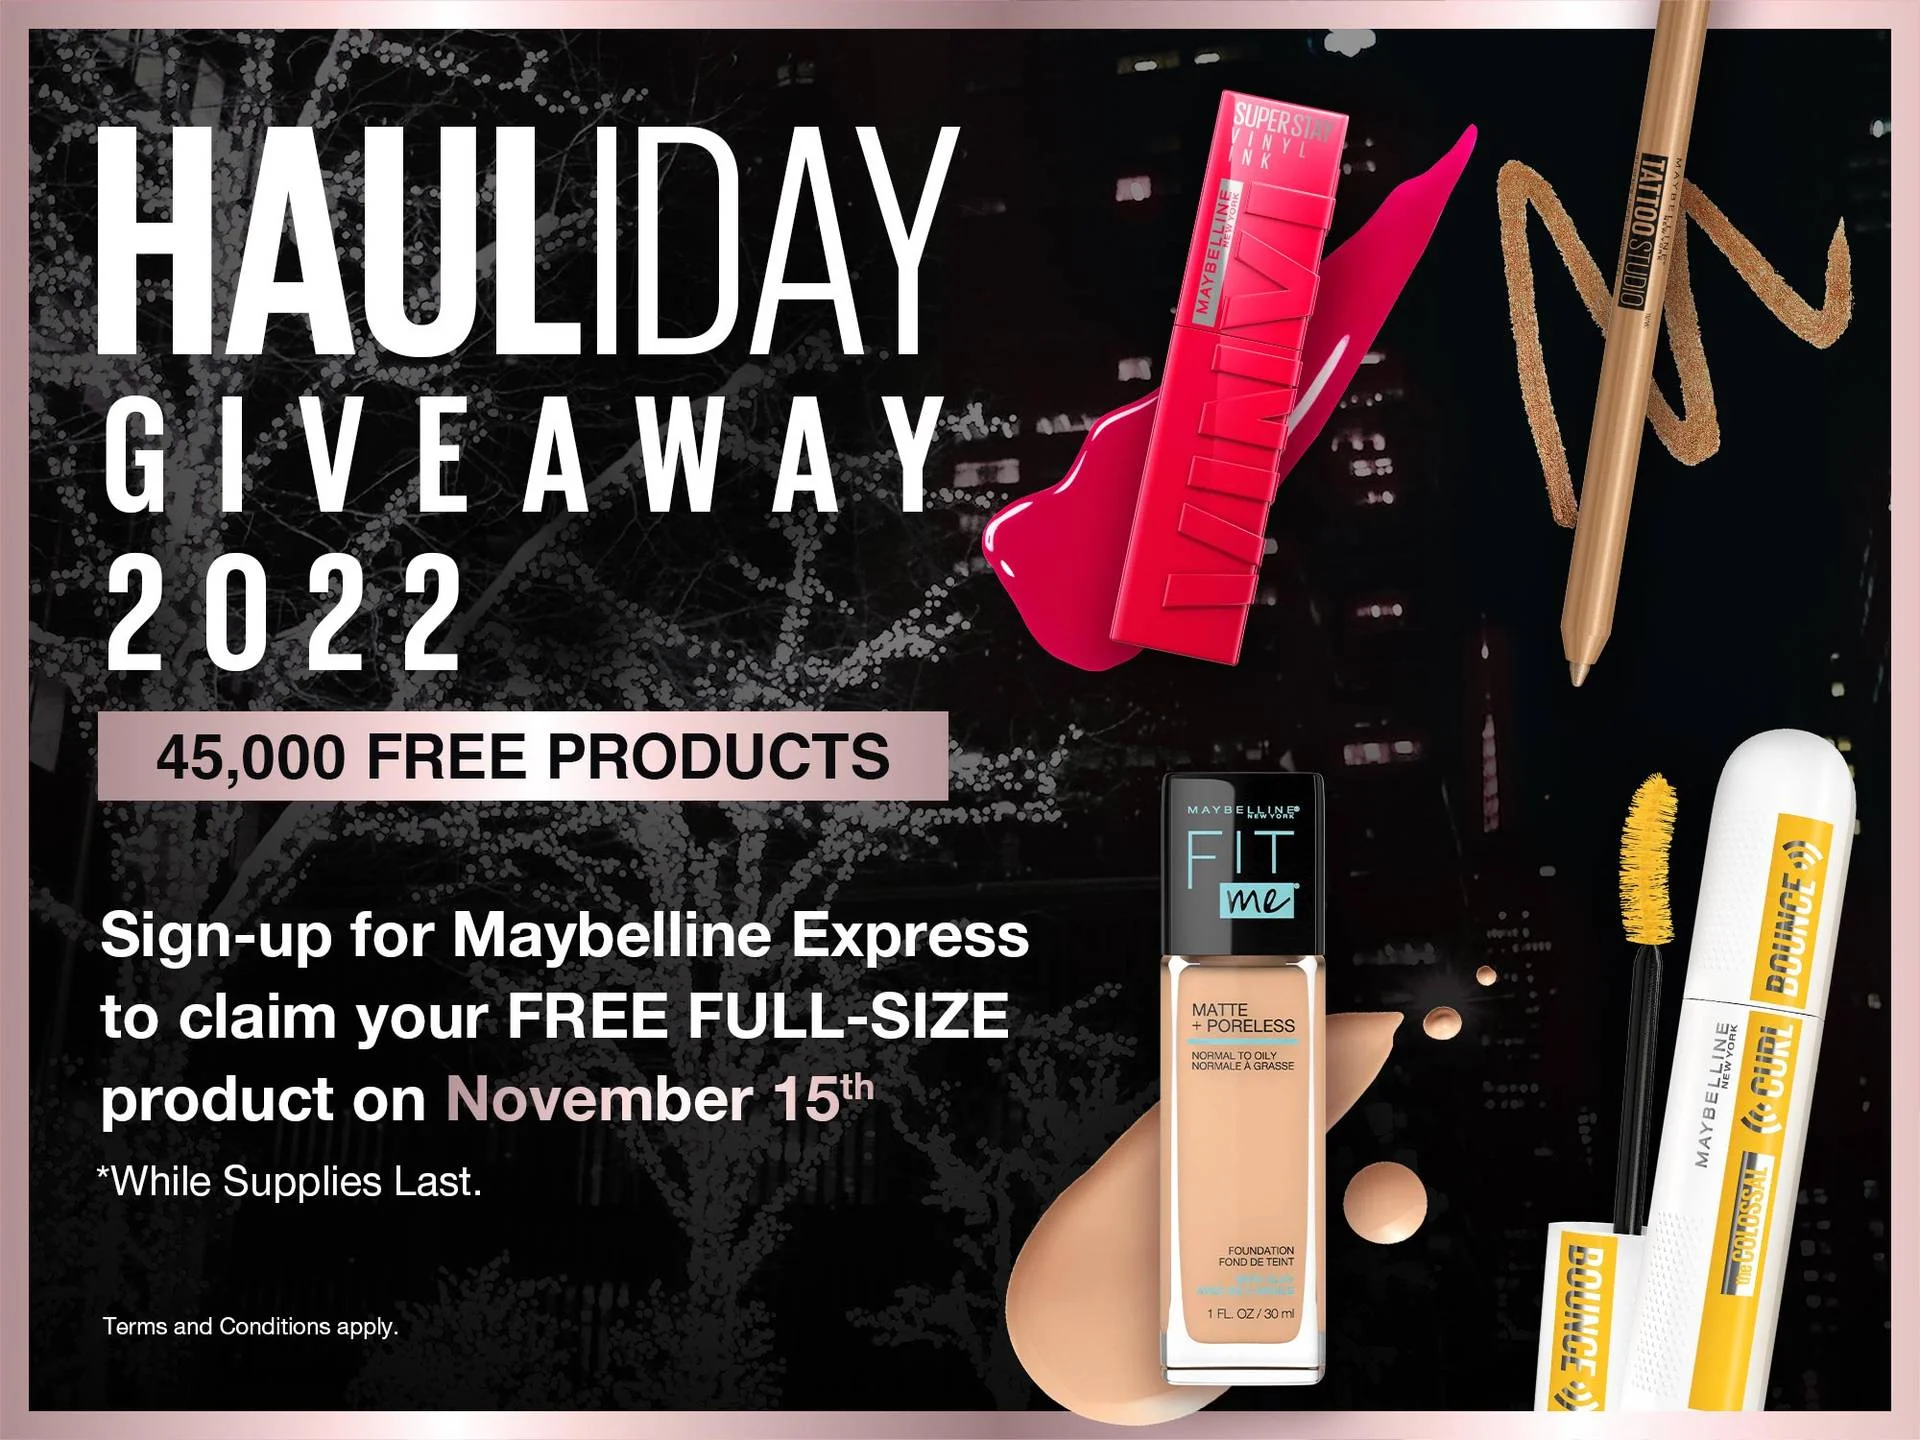 Free Full Size Maybelline Product Register NOW